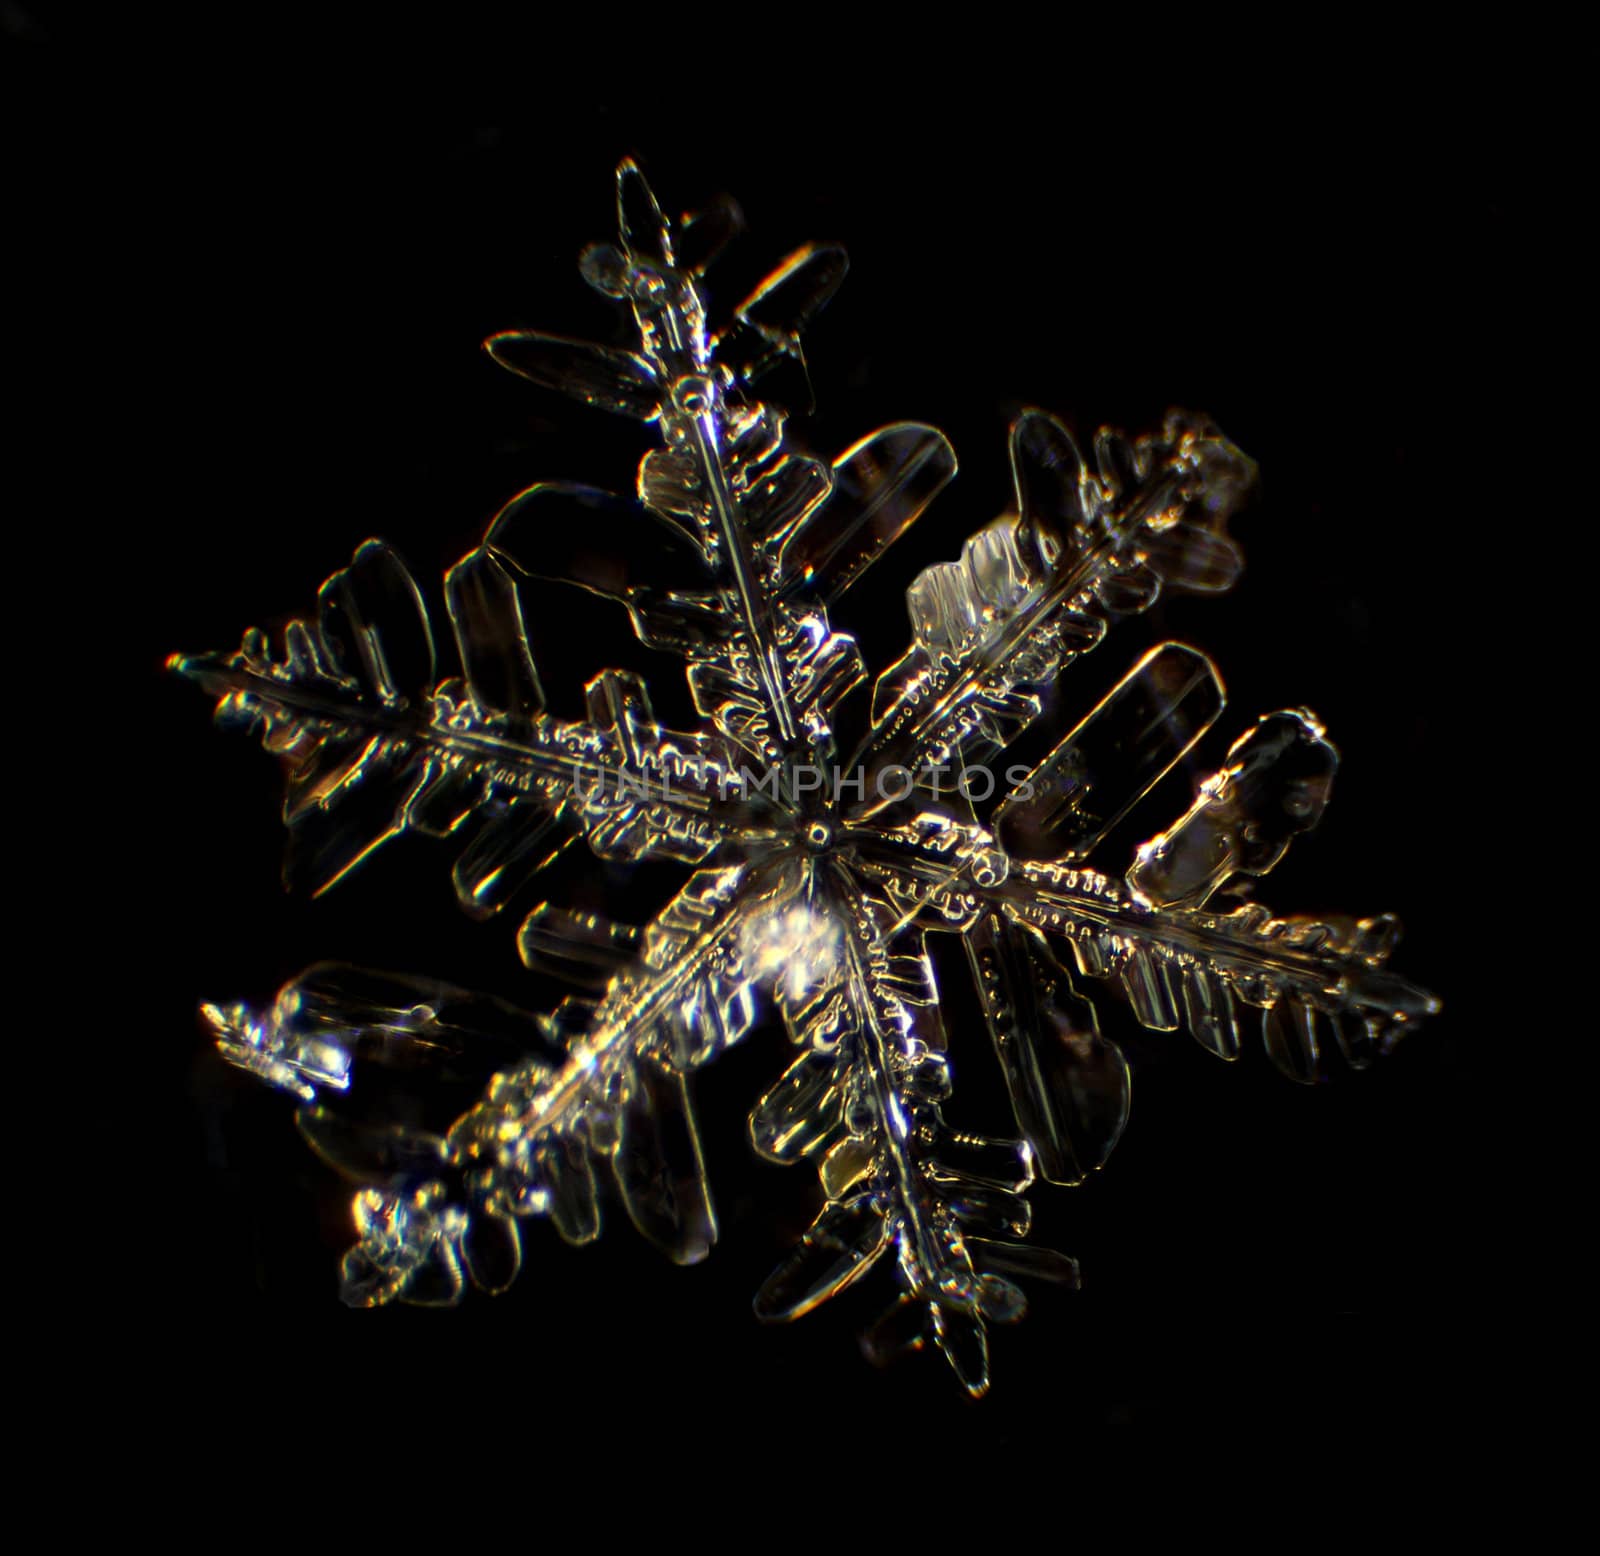 Snowflake under a microscope on the black background
